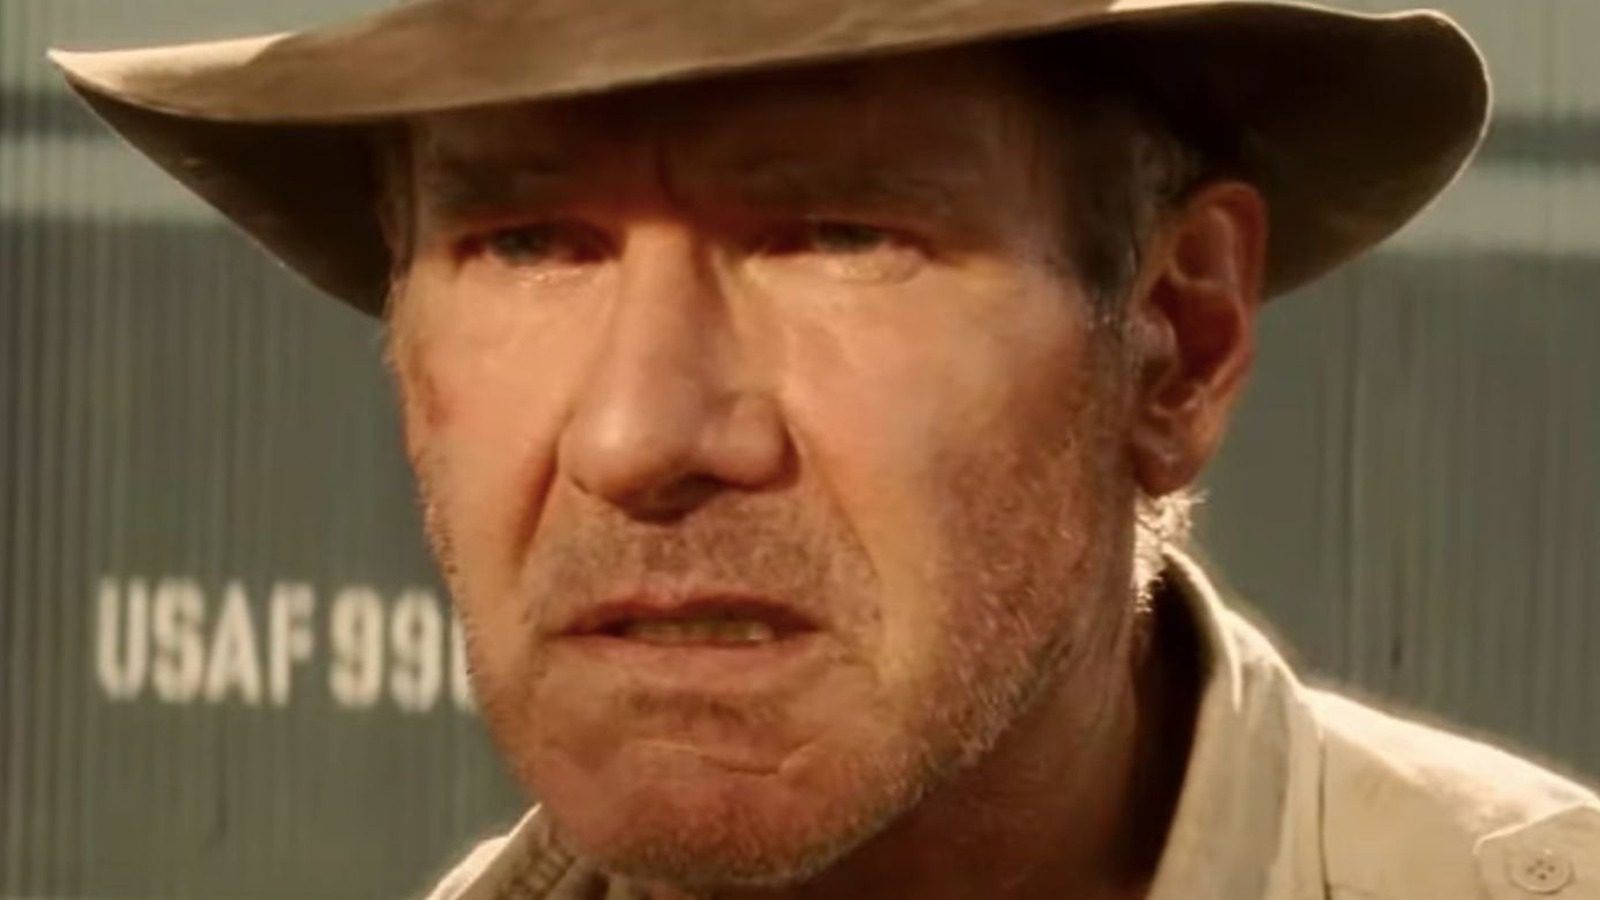 The Absurd Indiana Jones 4 Plotline The Screenwriter Wanted To Change